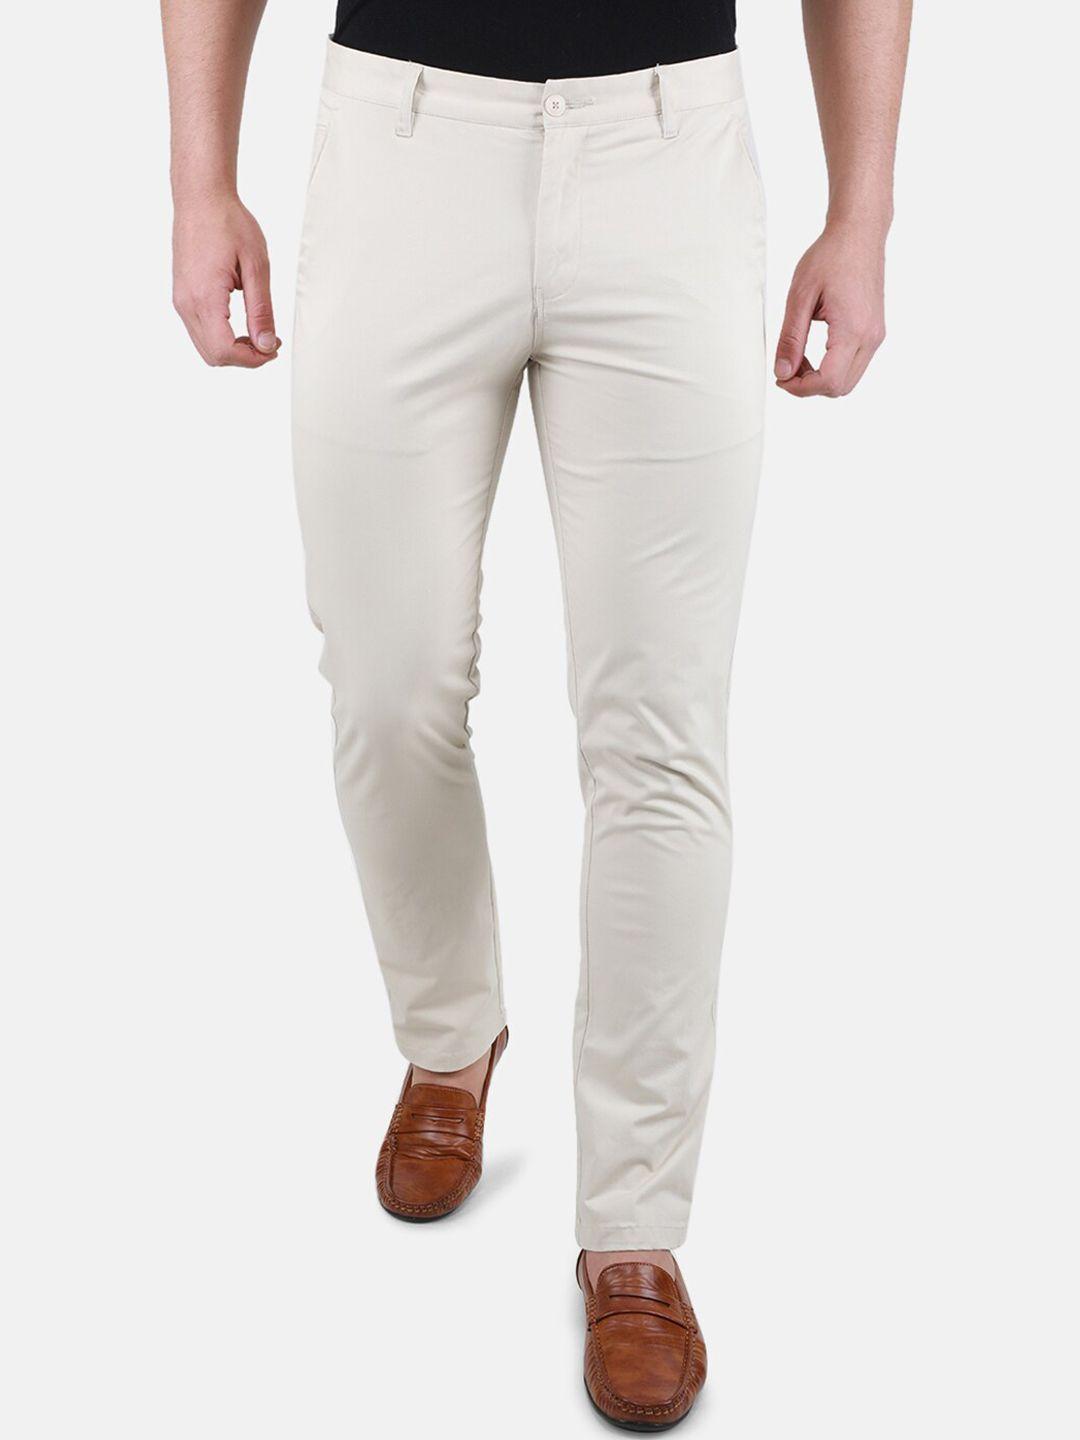 monte carlo men mid-rise plain chinos formal trousers